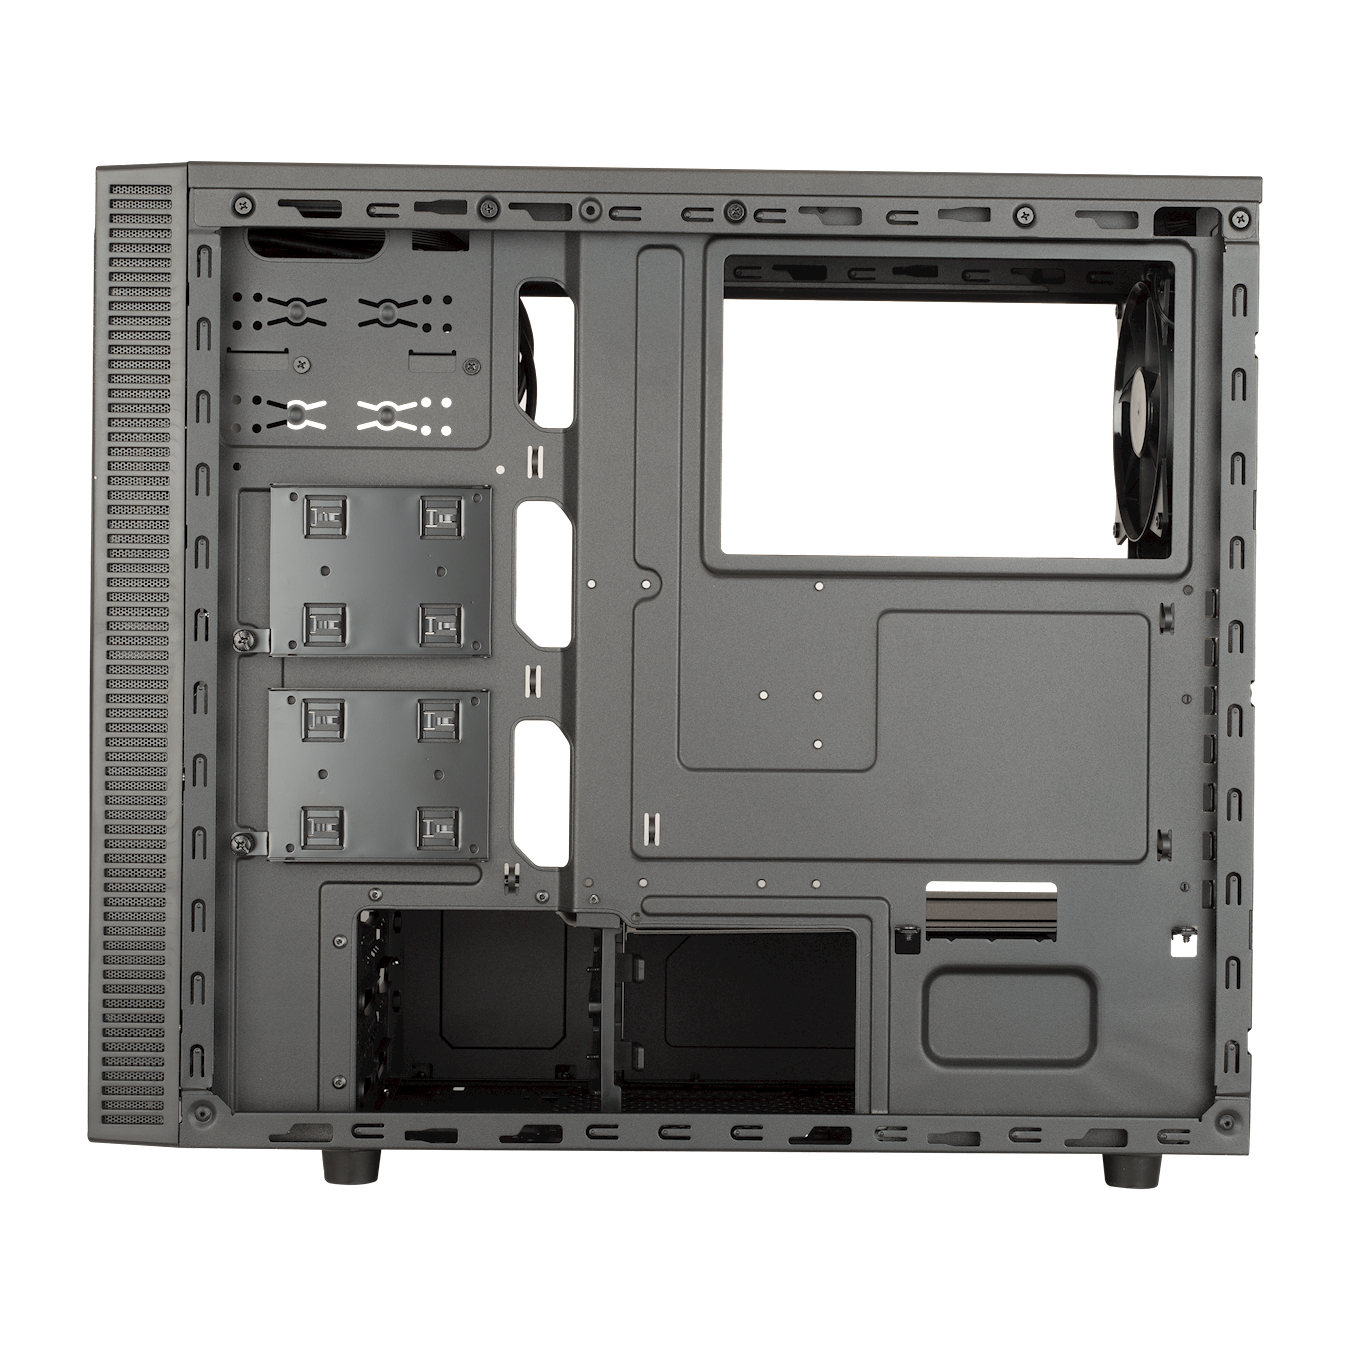 MasterBox E500L (Side Window Panel Version) Mid Tower Case - The front slide panel hides your I/O ports, but keeps it easy to access when needed.